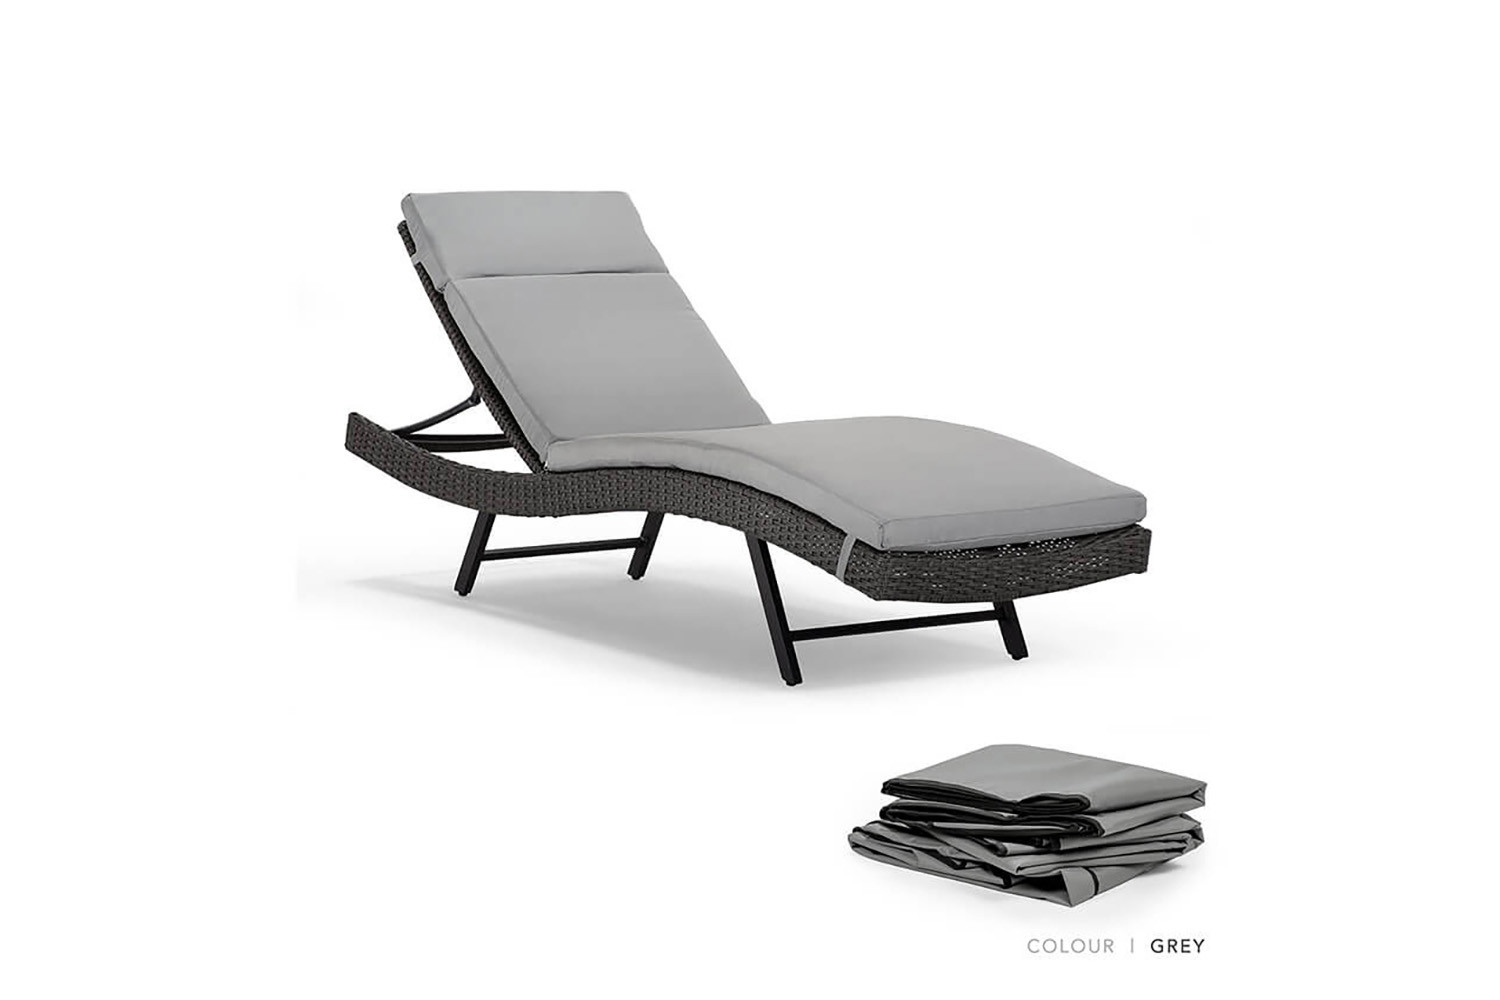 Protective Covers for Patio and Outdoor Furniture | Cielo